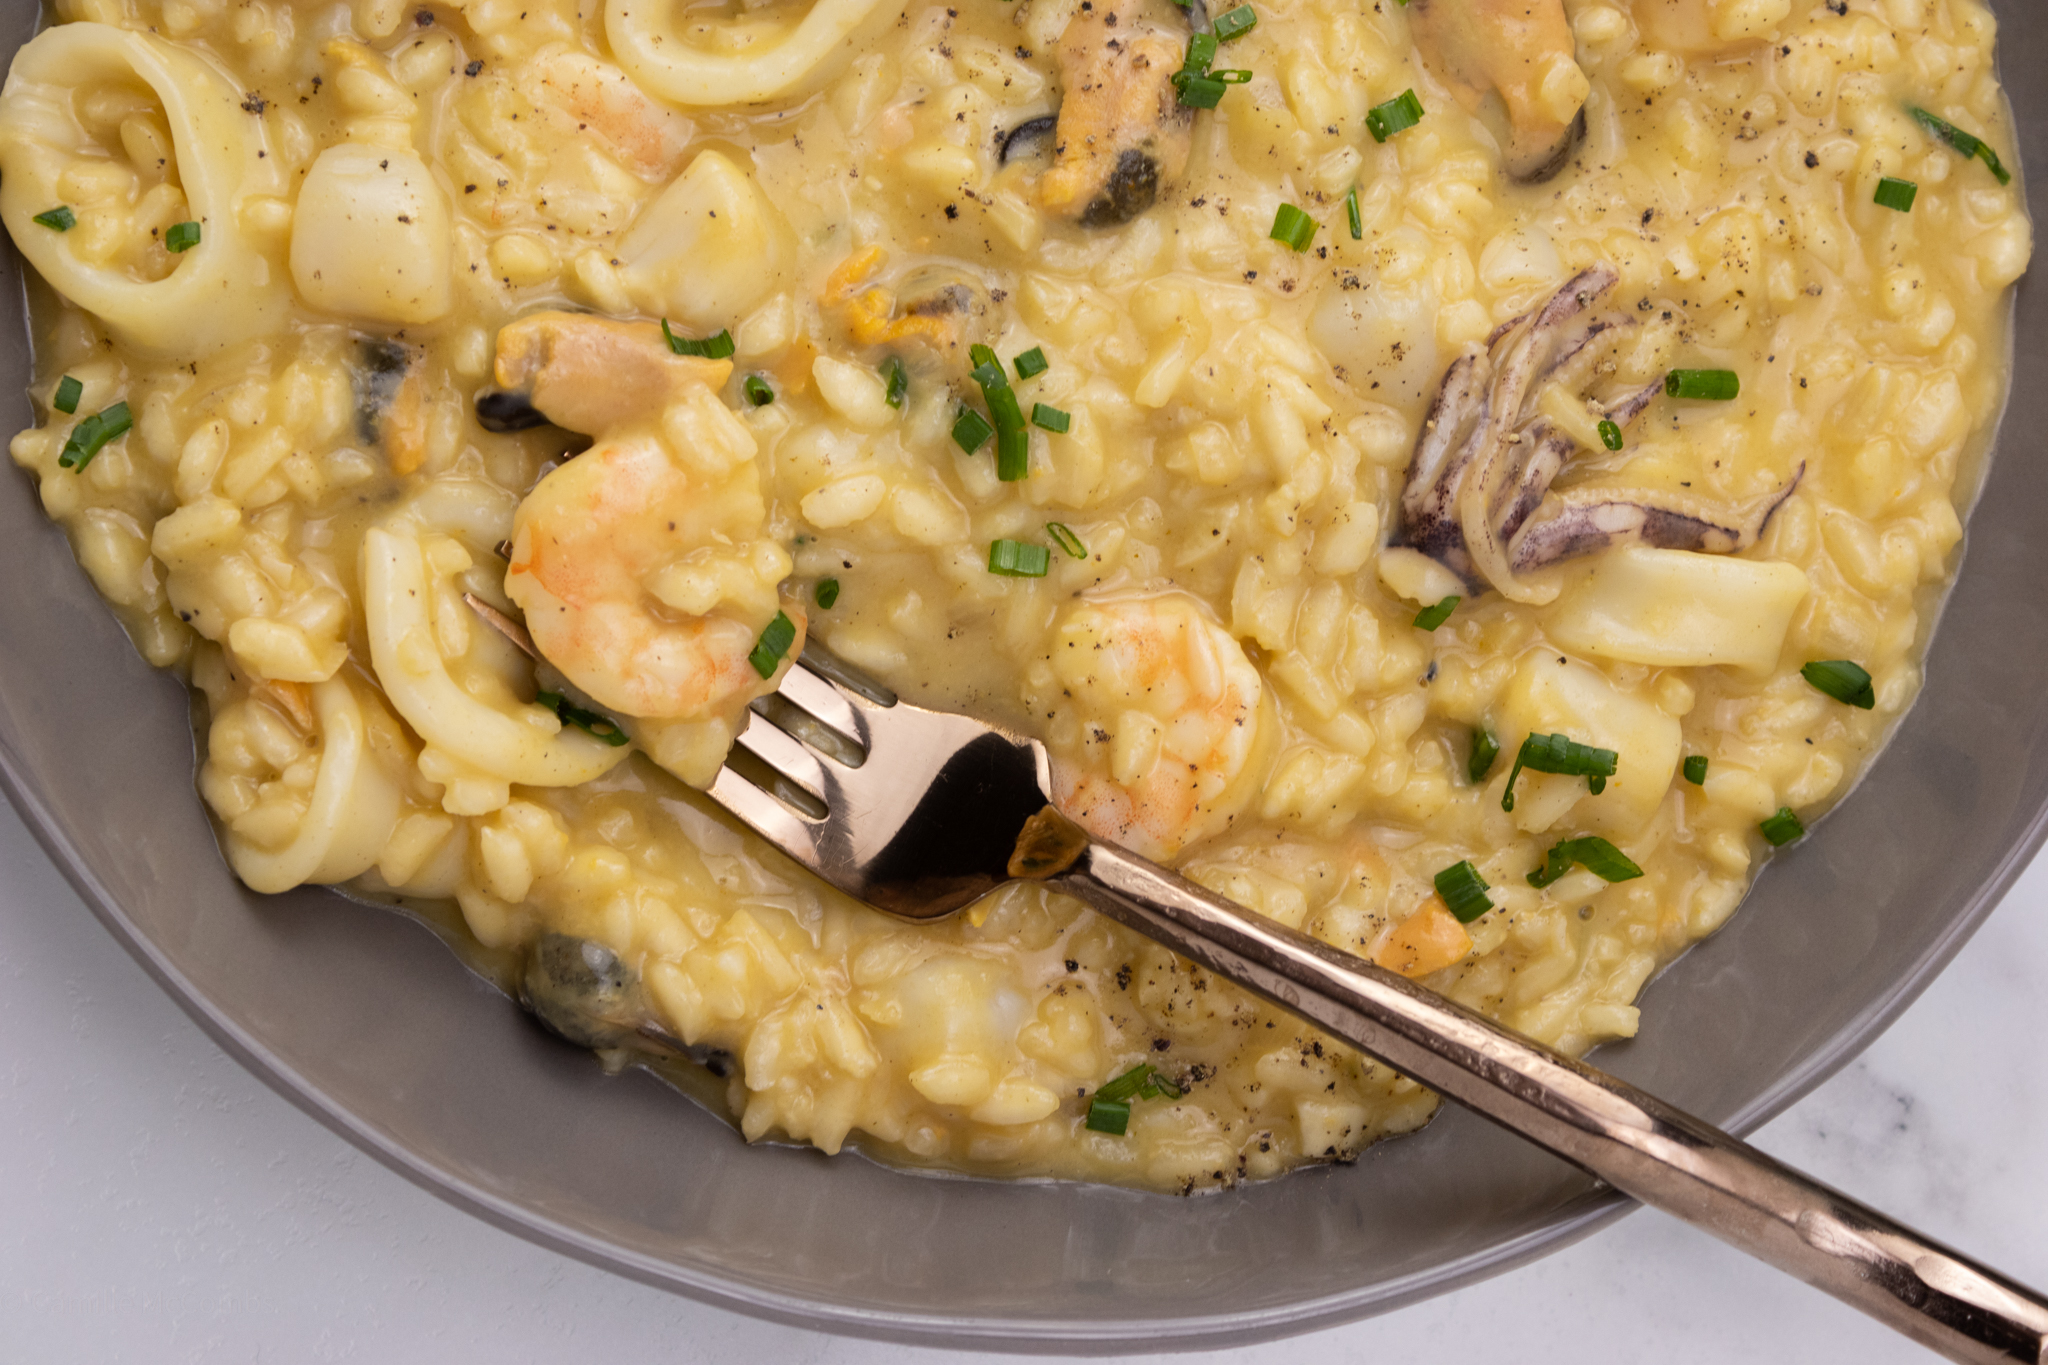 https://mylifeinanaprn.com/wp-content/uploads/2021/02/seafood-risotto-plated-closeup.jpg